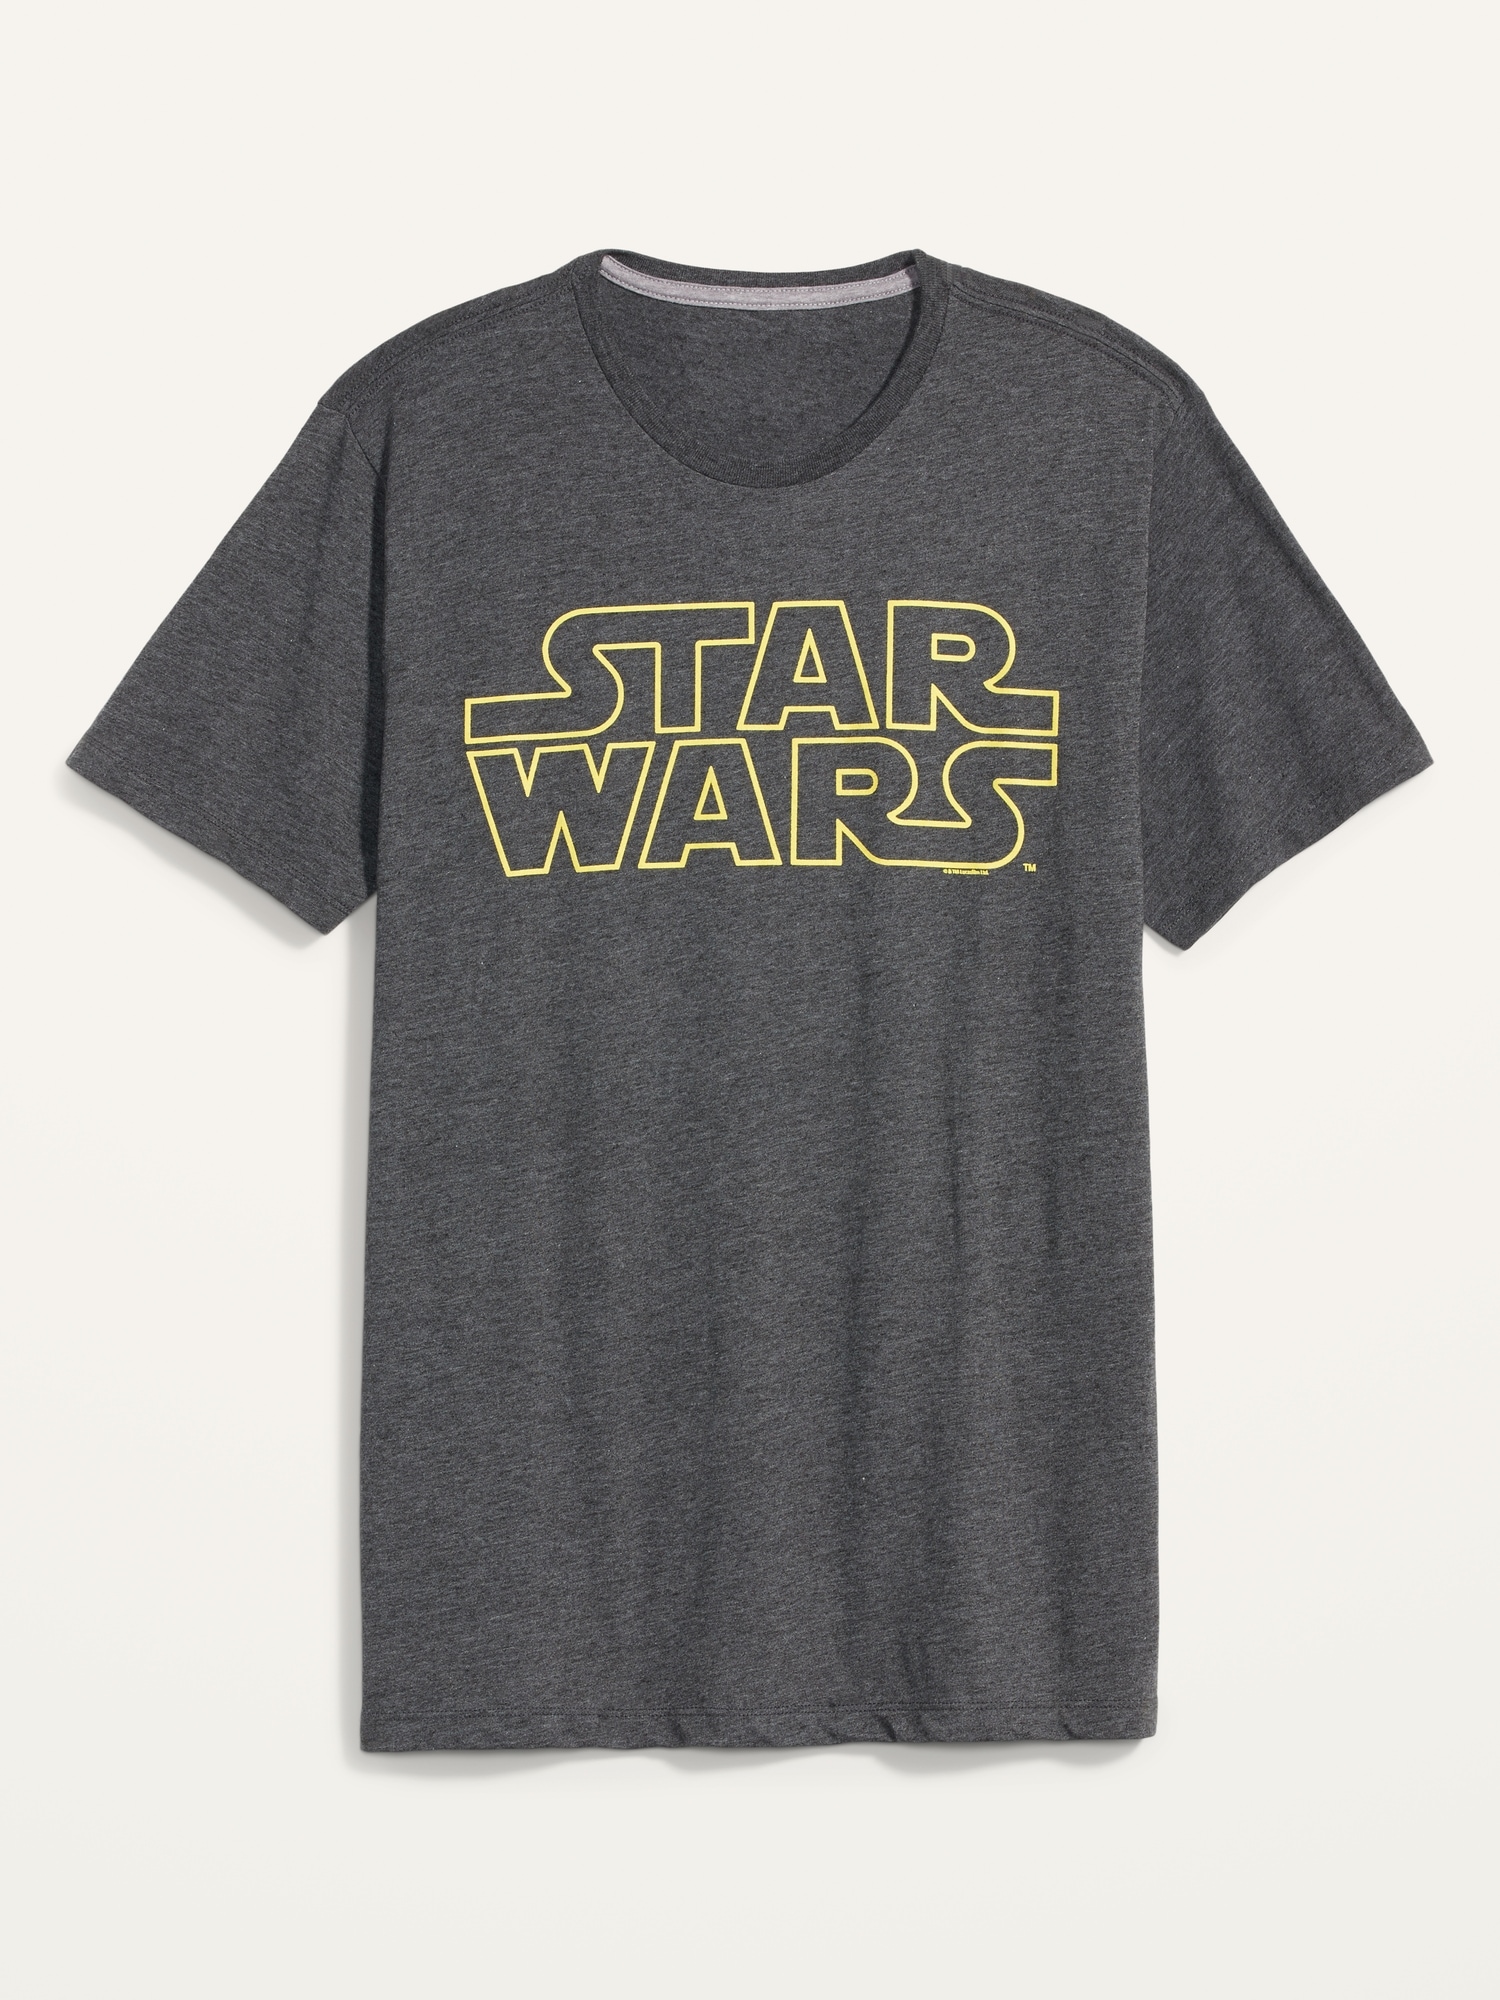 Old Navy Star Wars Graphic gender-neutral T-Shirt for Adults - - Size XXL